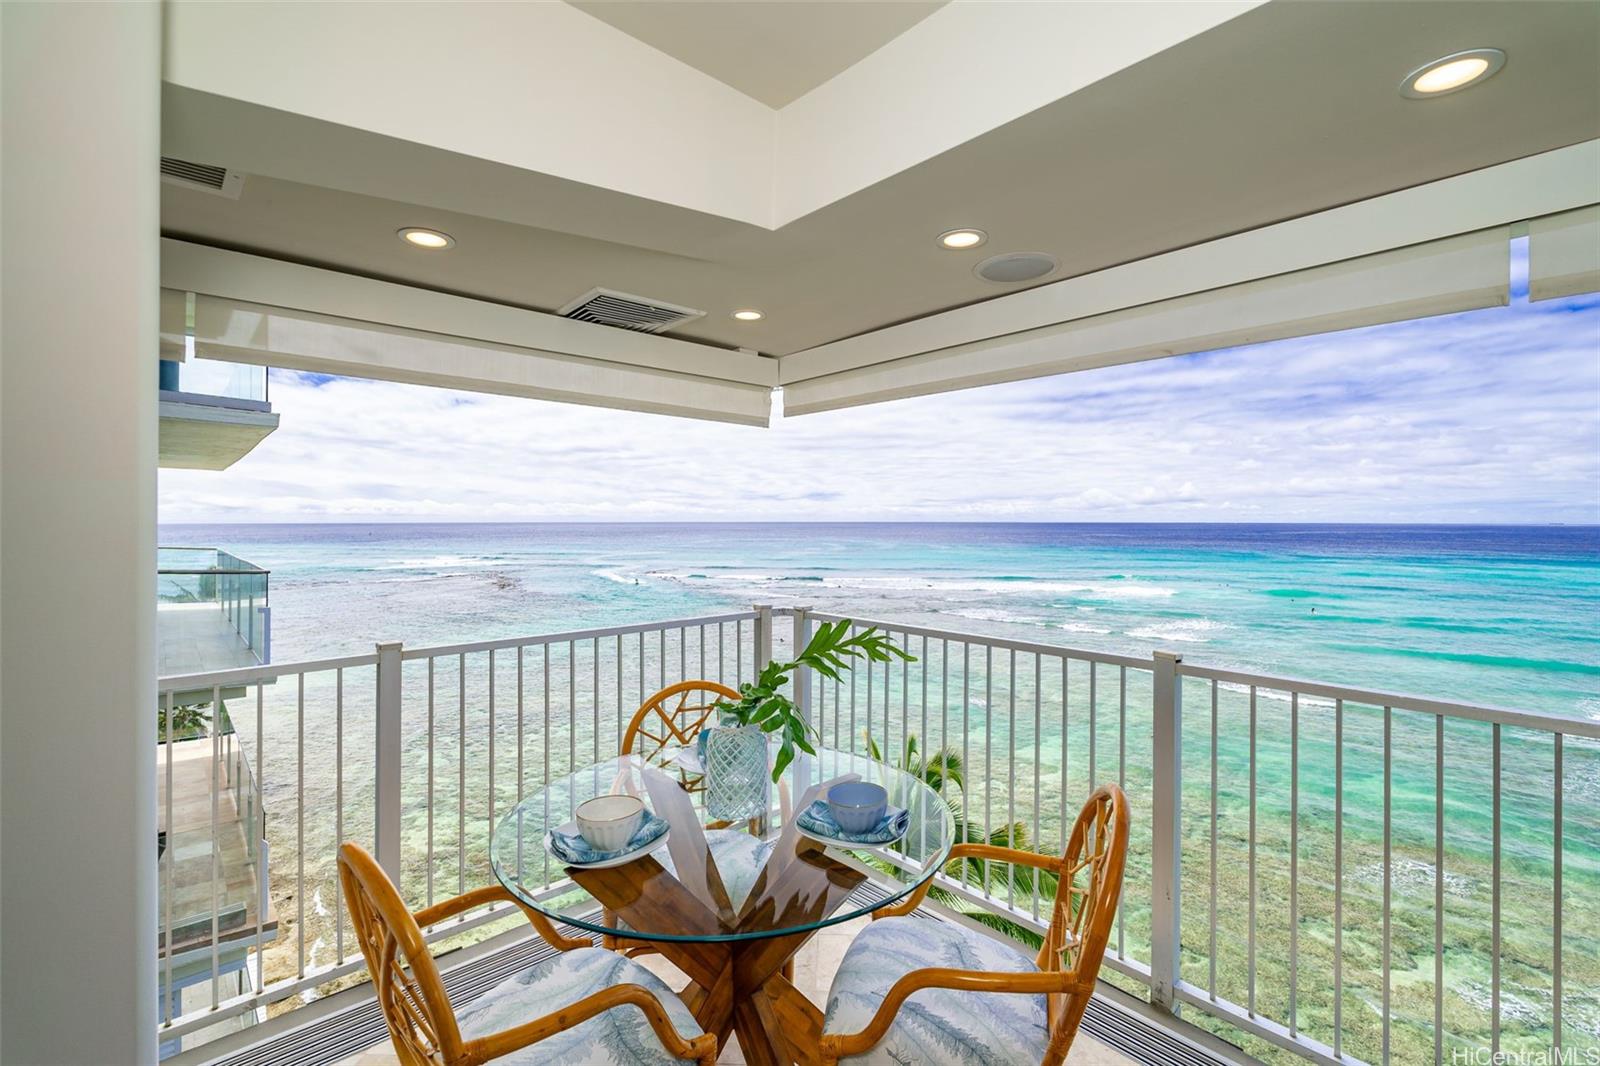 Paradise Found! Enjoy endless ocean views from this high floor unit on the coveted Gold Coast of Oahu. This is  one of only a handful of buildings along the South shore of the island.